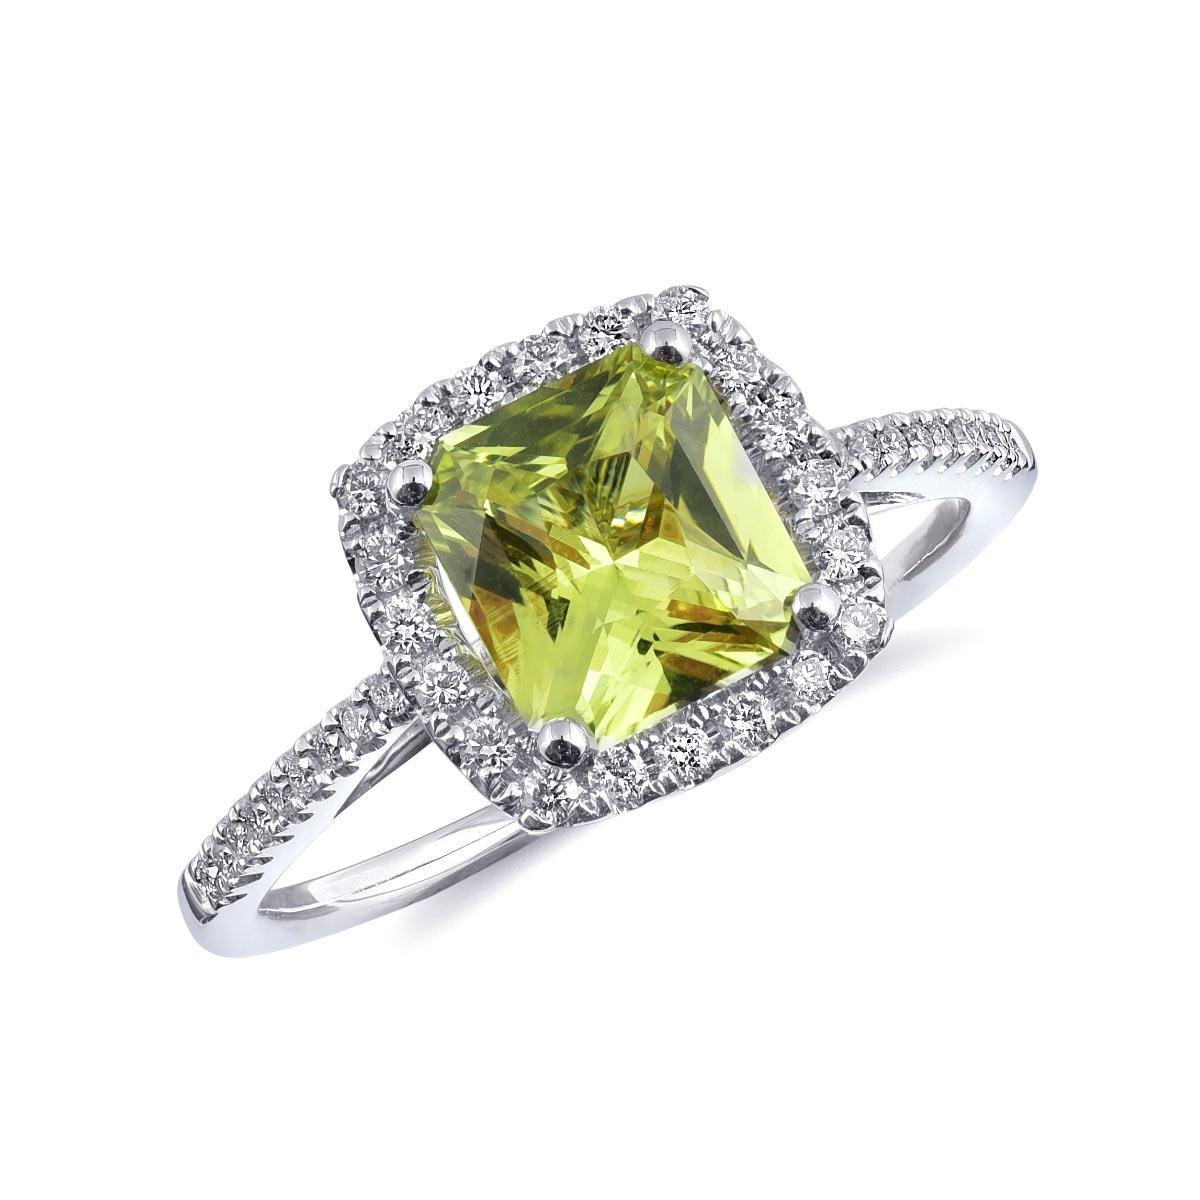 1.33 Carats Chrysoberyl Diamonds set in 14K White Gold Ring In New Condition For Sale In Los Angeles, CA